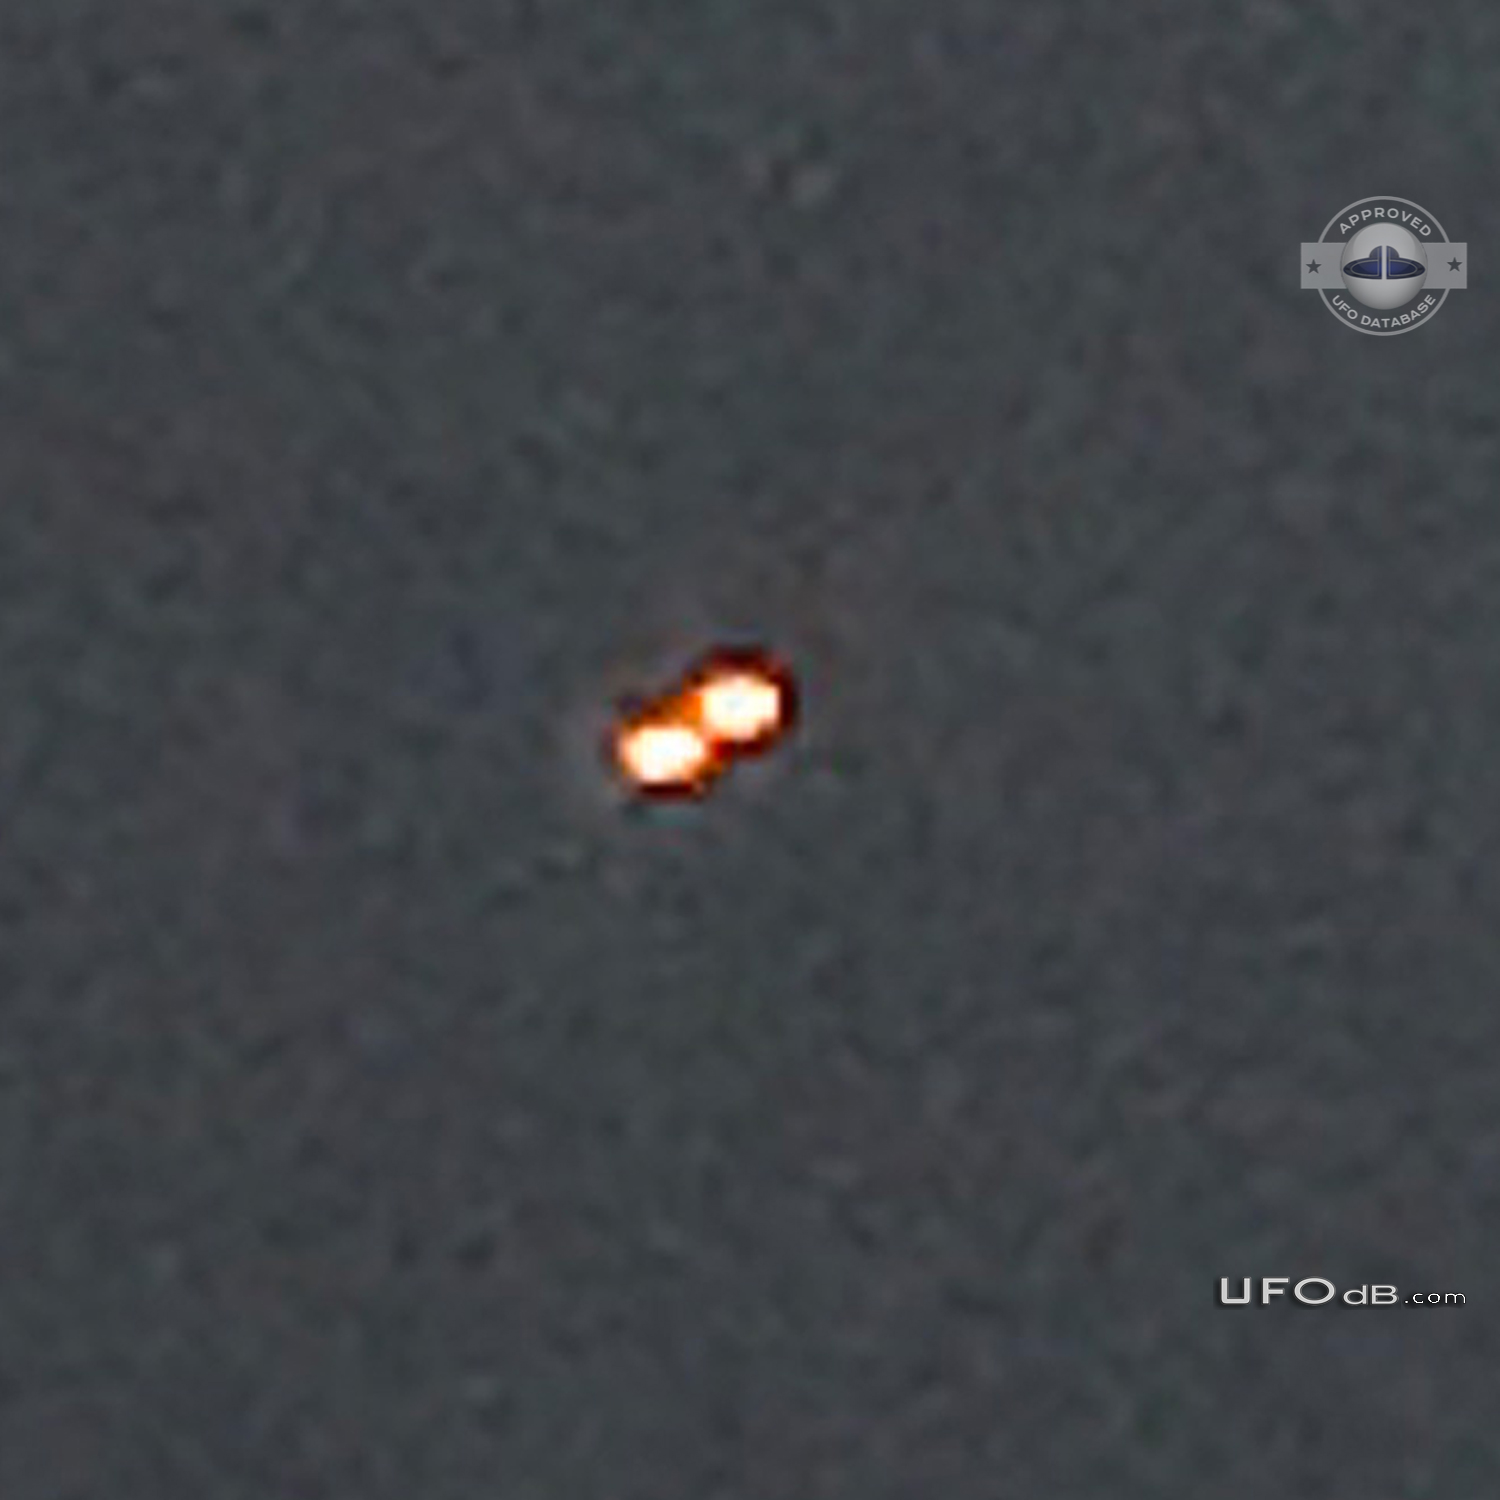 Weird UFO going in the water near the Emerald Coast in North Carolina  UFO Picture #843-2